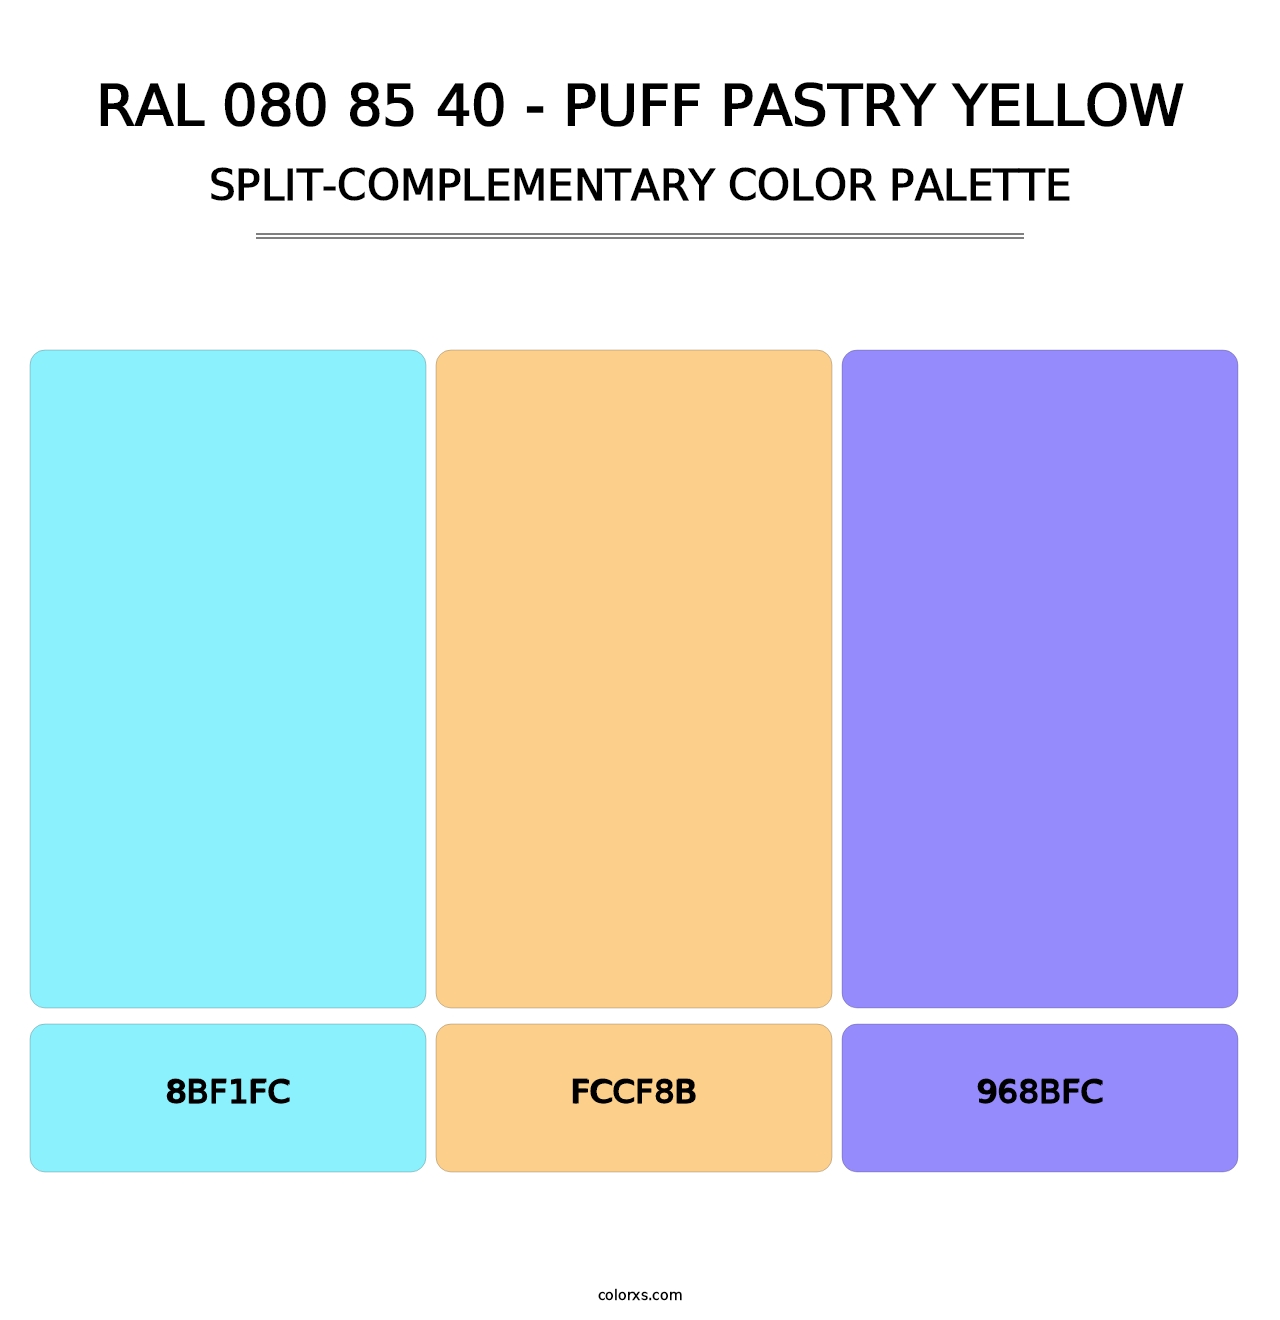 RAL 080 85 40 - Puff Pastry Yellow - Split-Complementary Color Palette